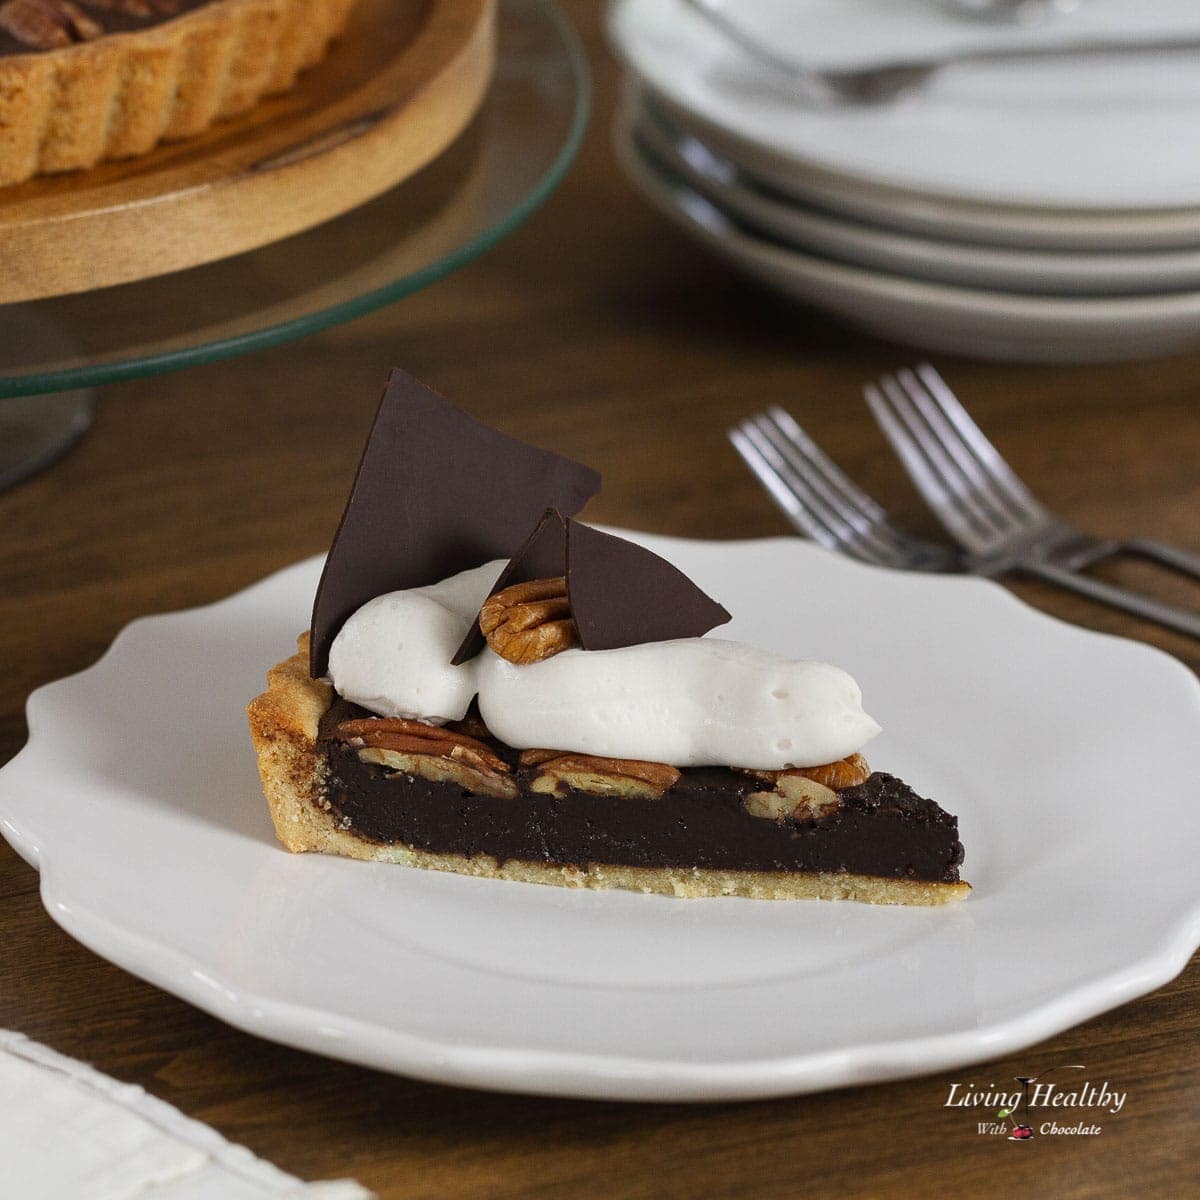 A slice of Chocolate Pecan Pie on a serving plate topped with Whipping cream and chocolate triangles